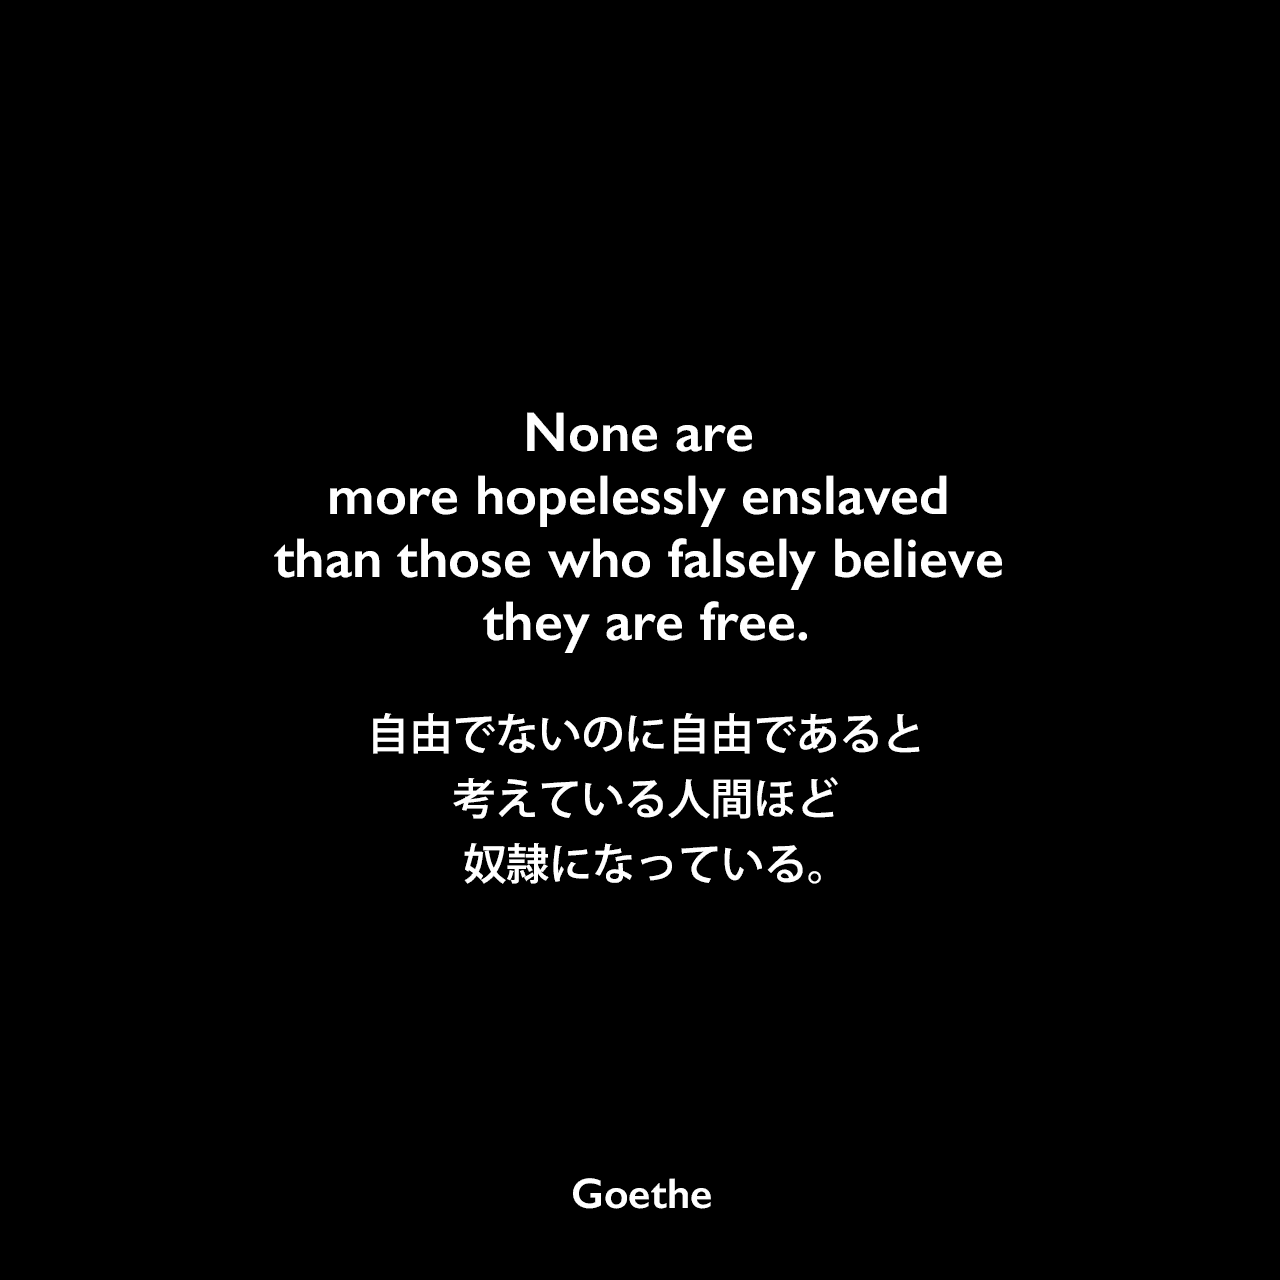 None are more hopelessly enslaved than those who falsely believe they are free.自由でないのに自由であると考えている人間ほど、奴隷になっている。- ゲーテの小説「親和力」よりJohann Wolfgang von Goethe